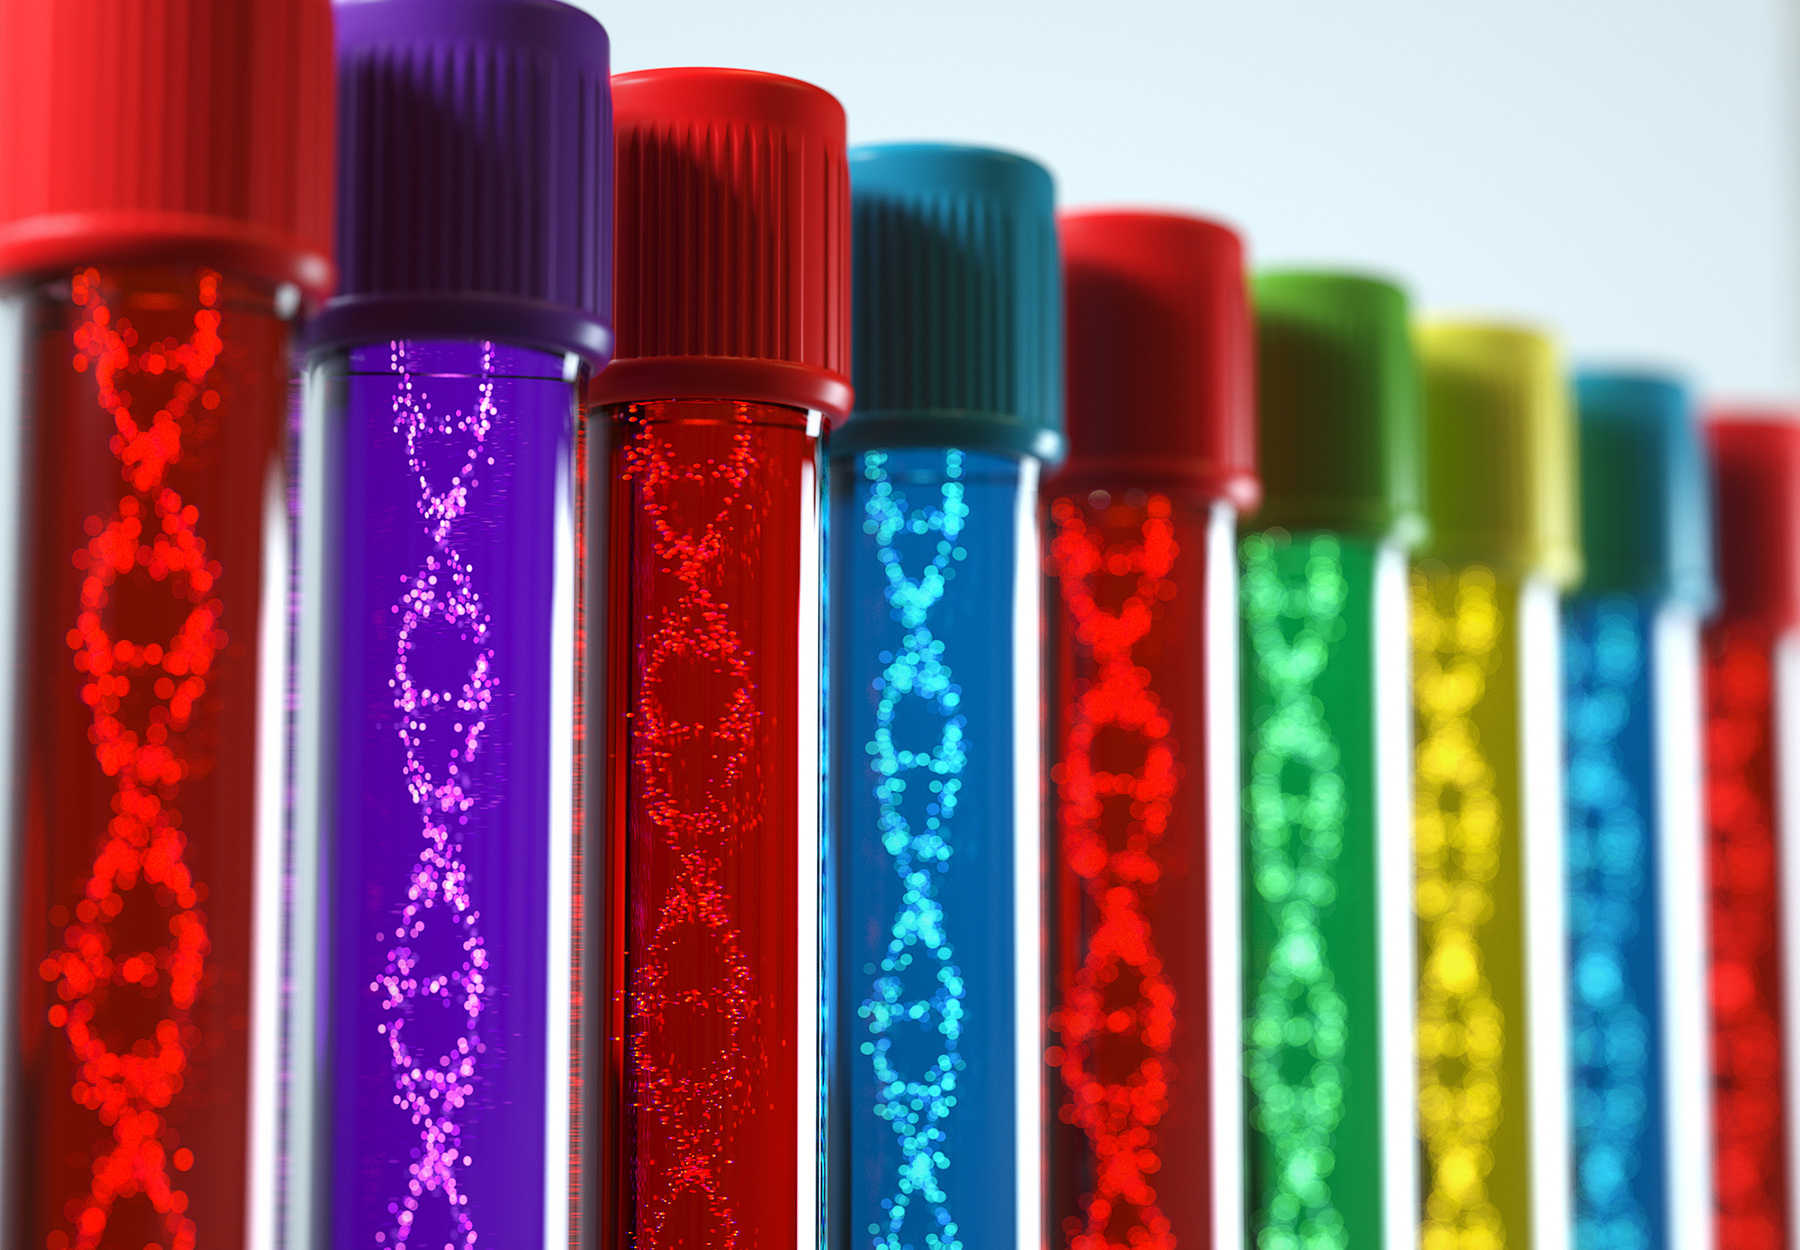 Test tube with DNA moleculeon abstract background,3d rendering,conceptual image.